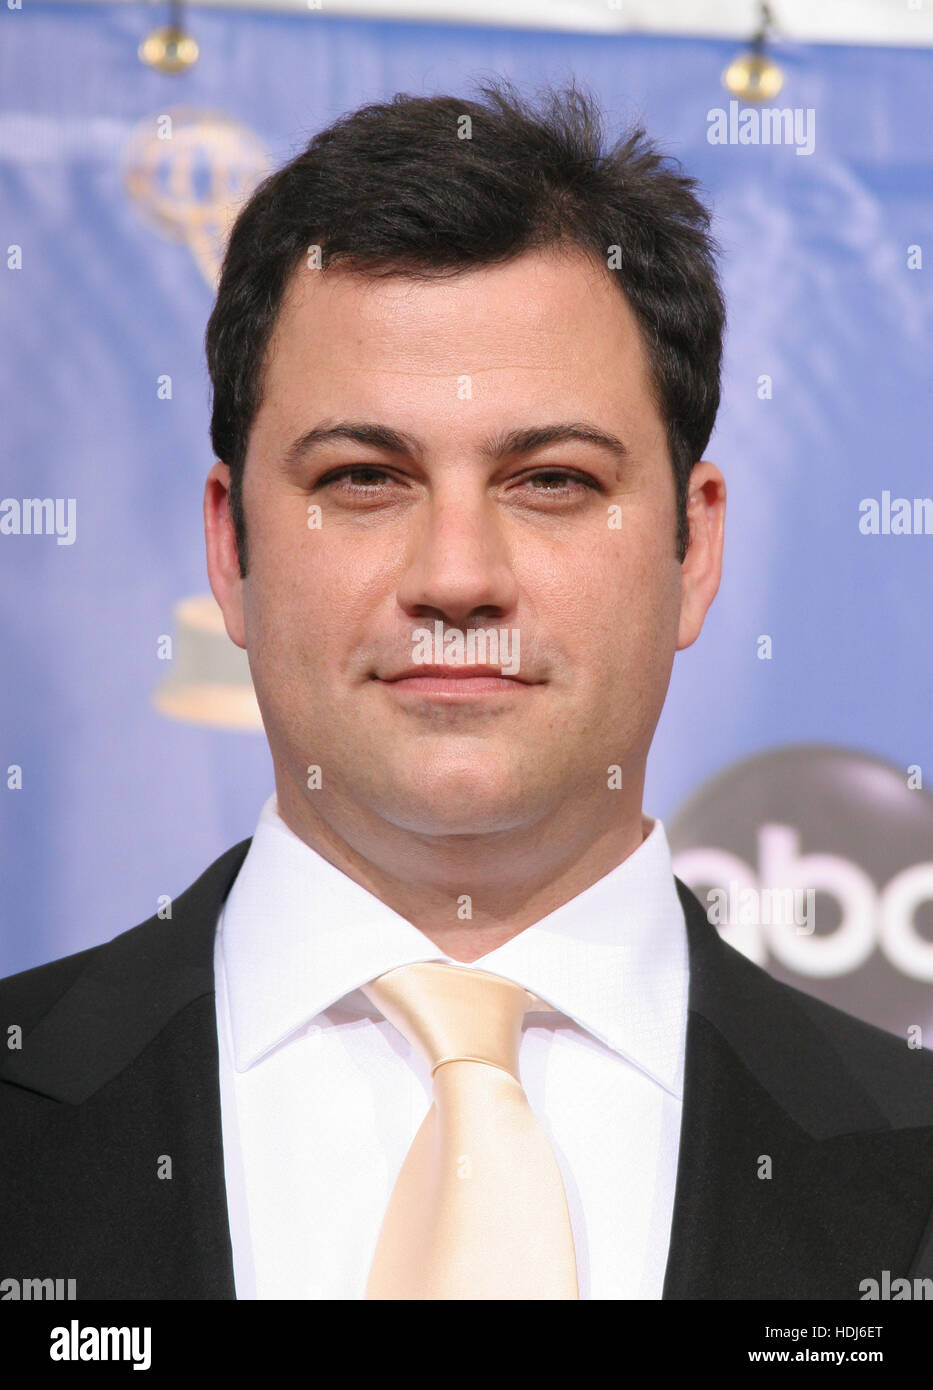 Jimmy Kimmel at the 56th Annual Emmy Awards  on September 19, 2004 in Los Angeles, California. Photo credit: Francis Specker Stock Photo